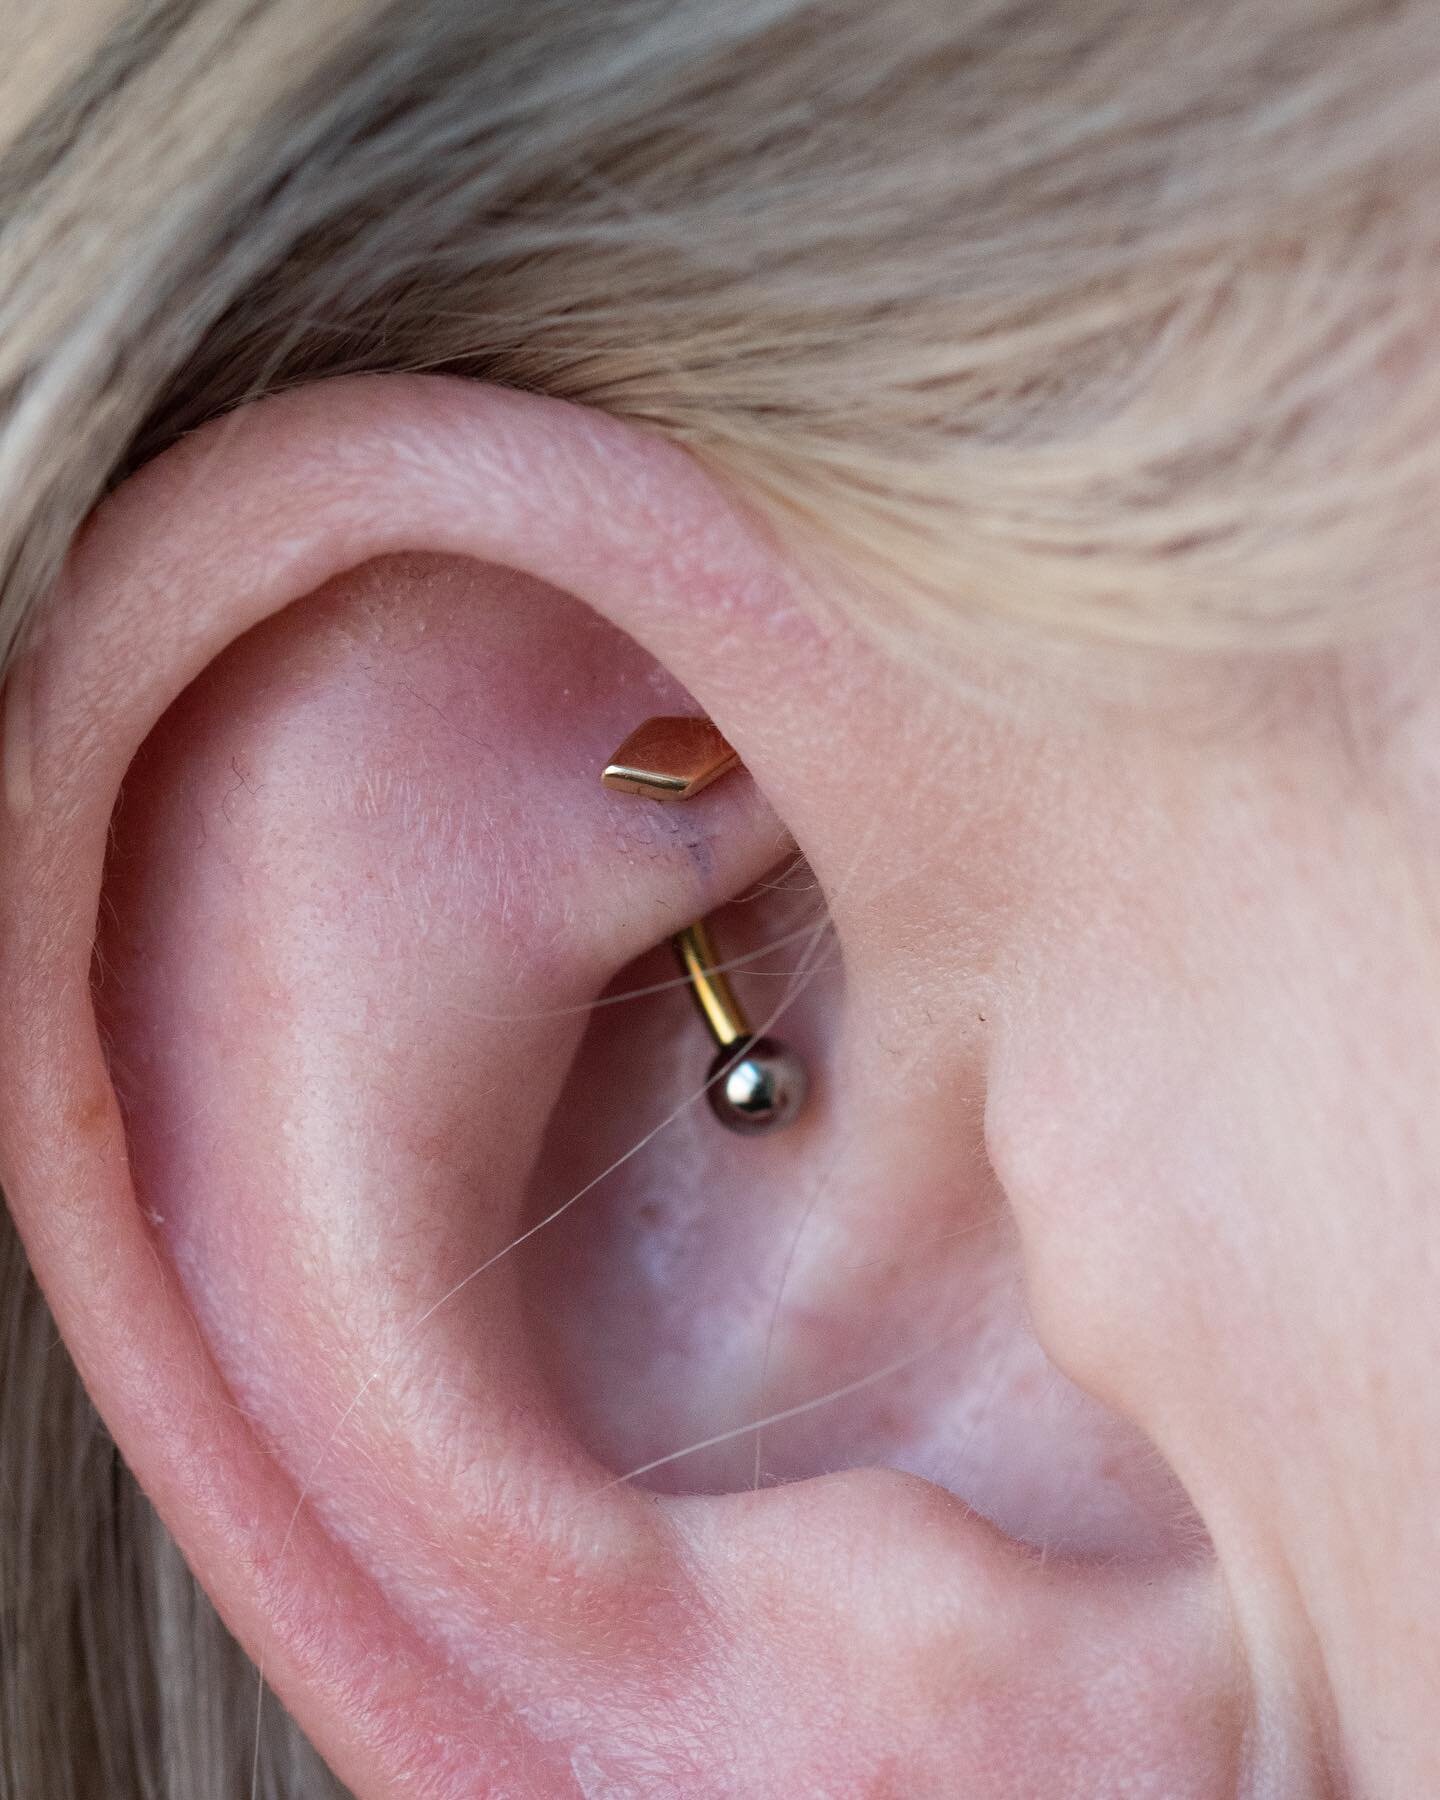 I wanna talk about something that feels a little bit scary sometimes - messing up a piercing. I did my very first rook (second slide) on Heather a month or so ago, and&hellip;. almost immediately took it out. It was way too shallow, and the likelihoo